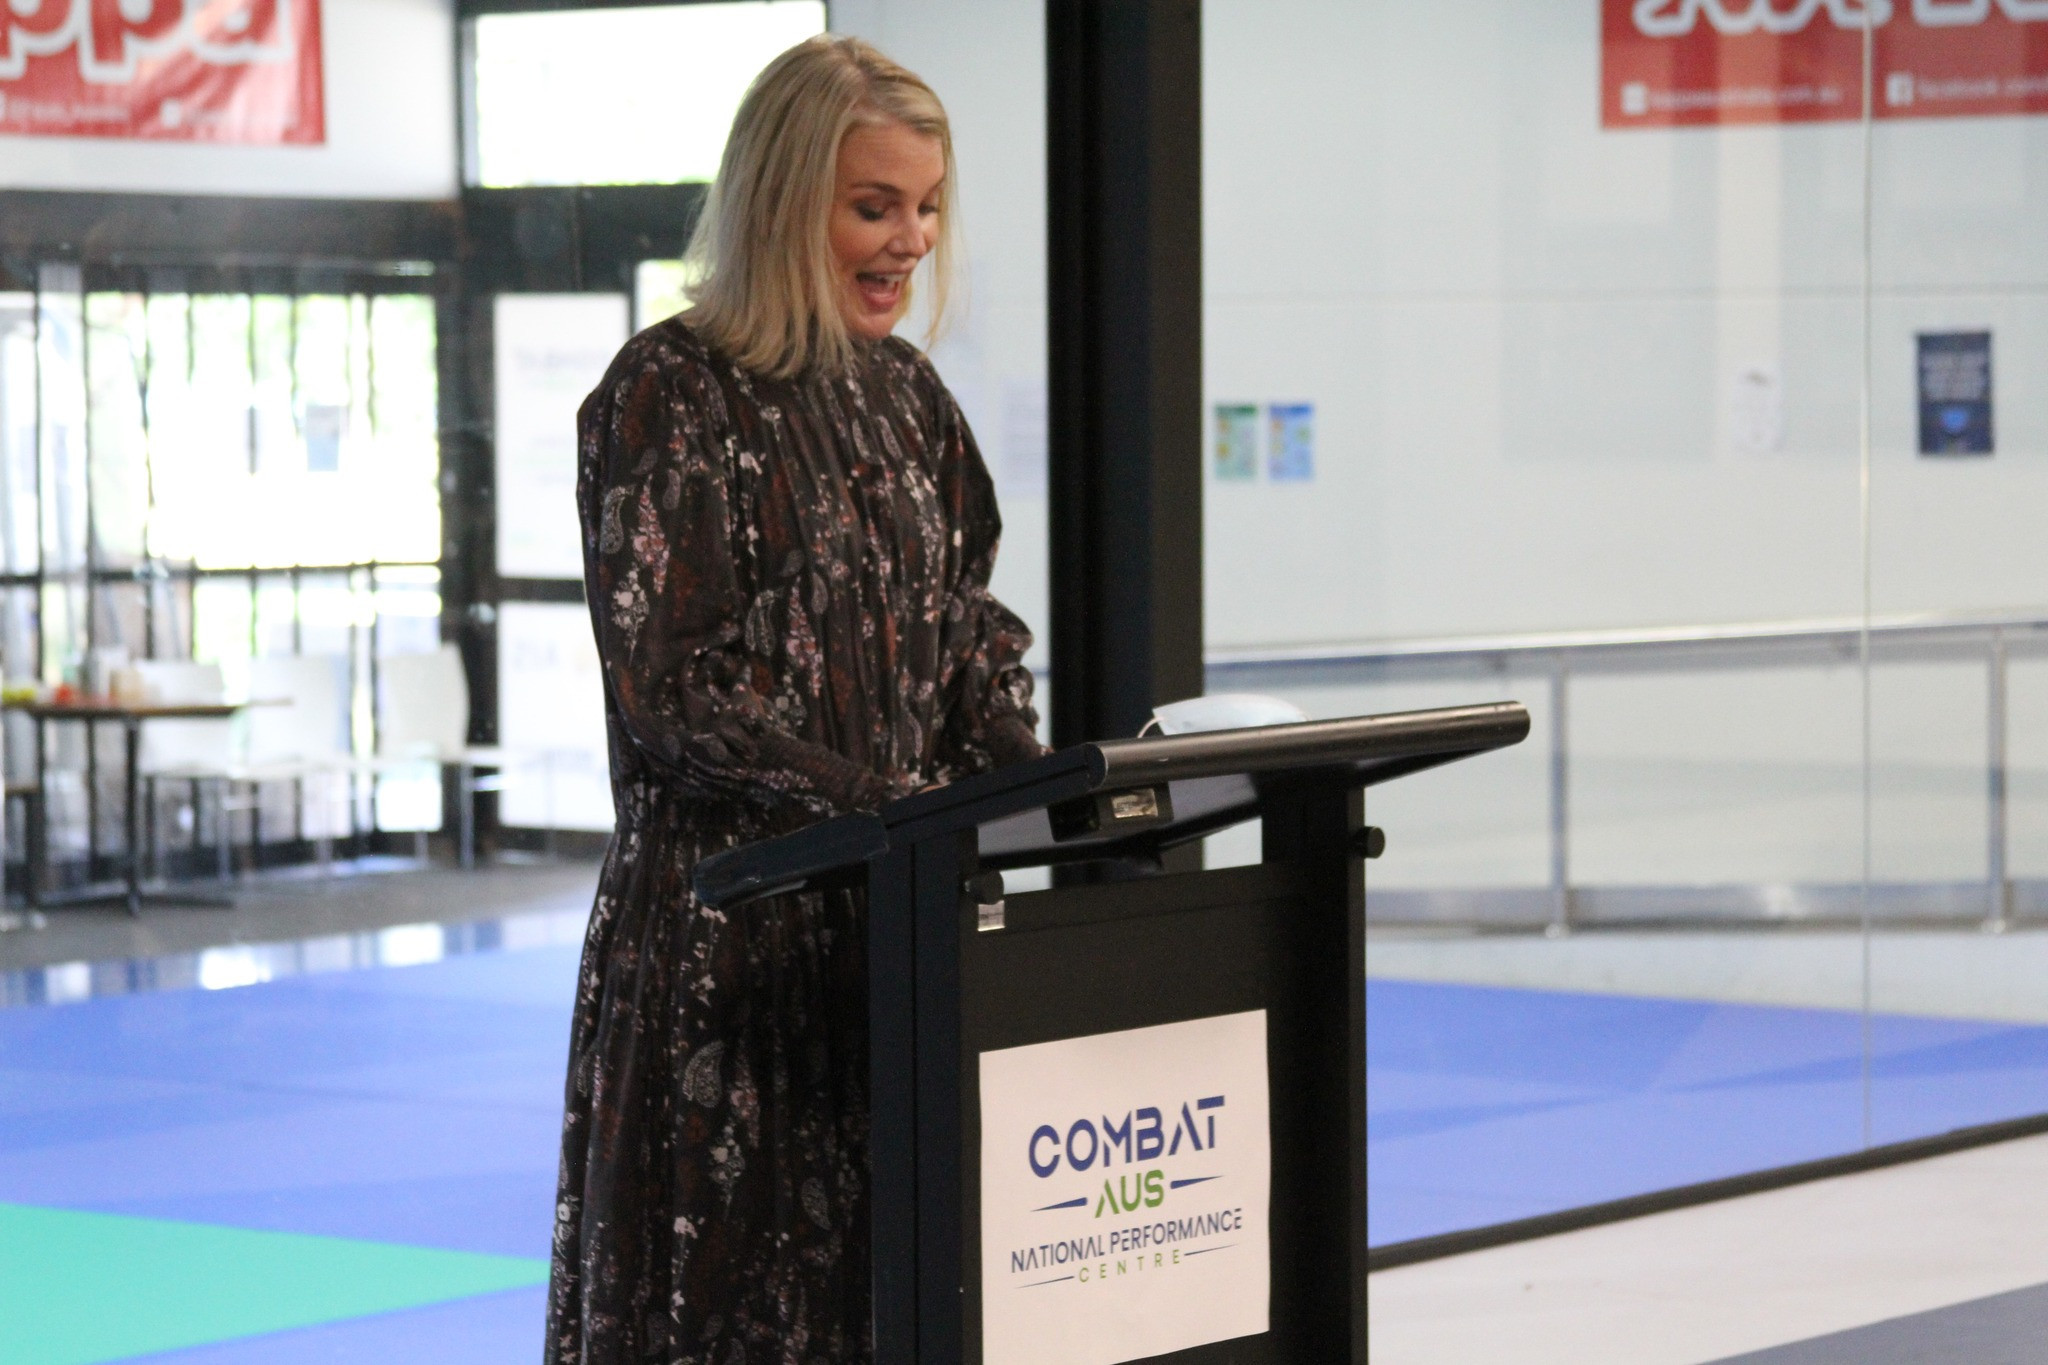 Matti Clements, the acting chief executive of the Australian Institute of Sport, opened Combat Institute of Australia's new National Performance Centre ©CombatAUS